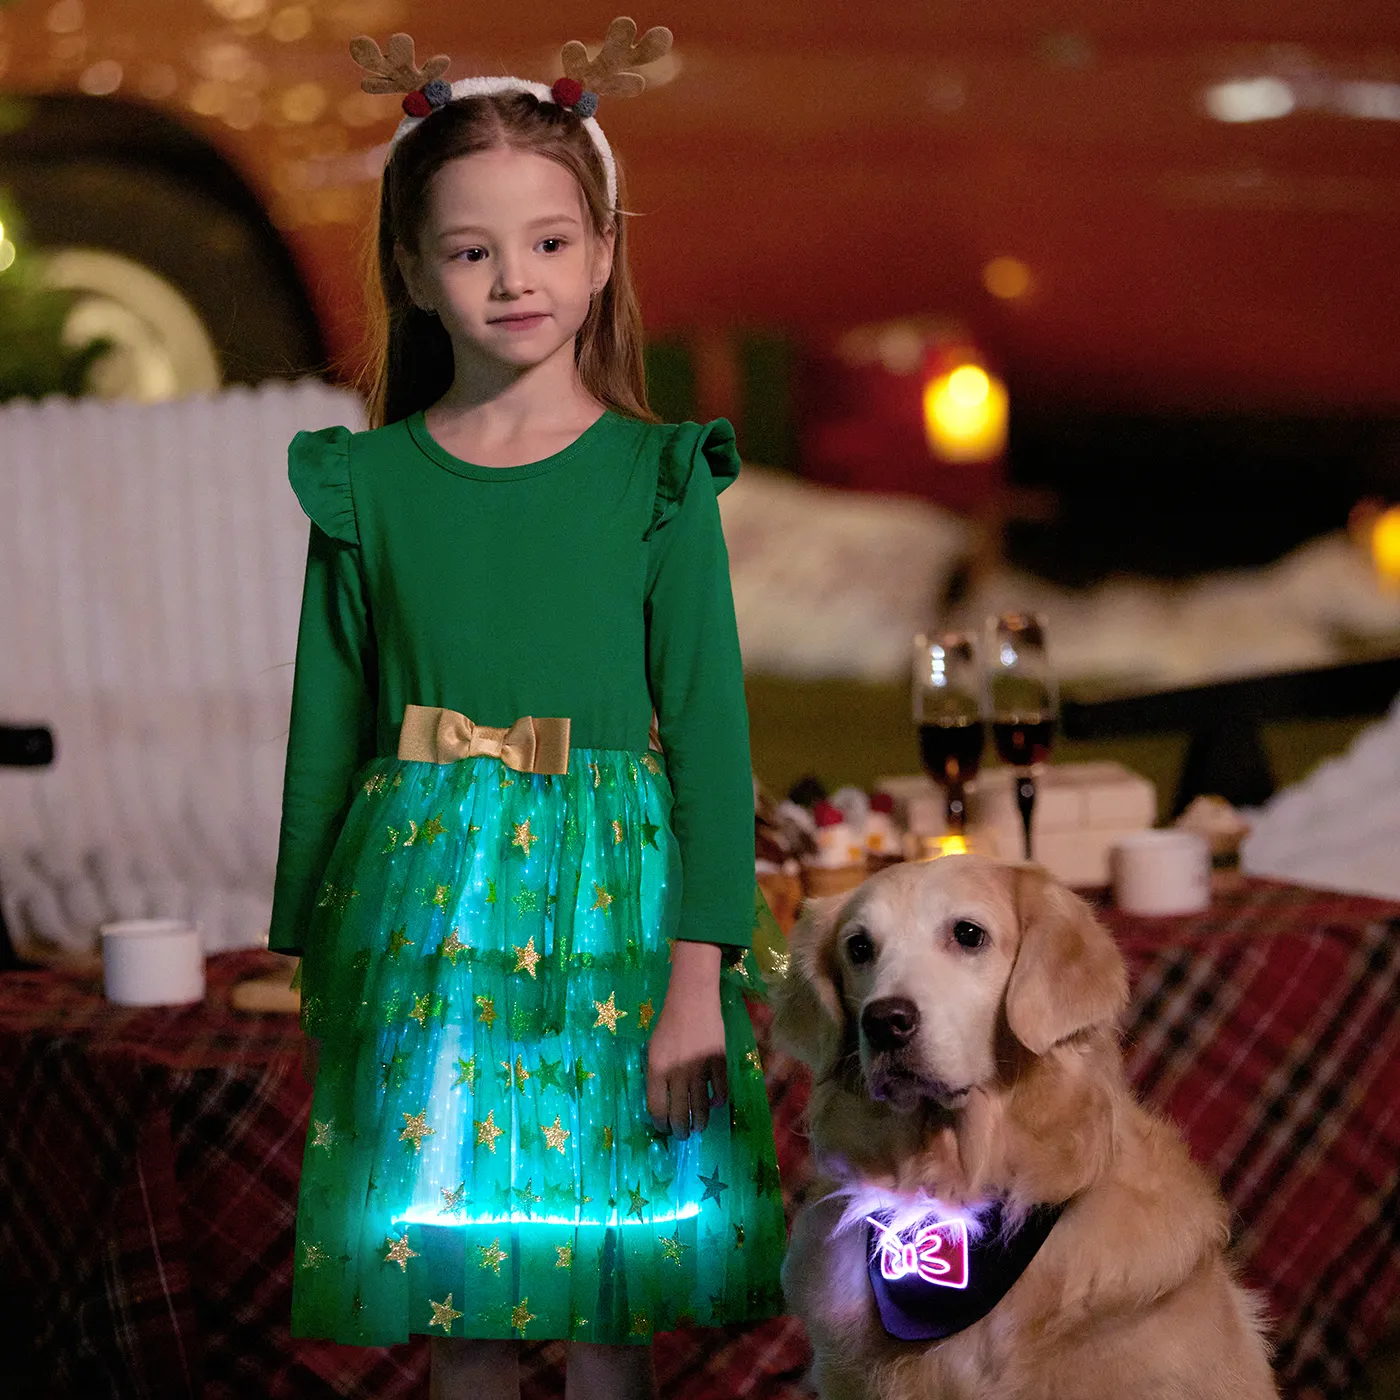 

Go-Glow Christmas Family Matching Long-sleeve Tops with Christmas Tree glowing & Illuminating Dress with Light Up Skirt Including Controller (Built-In